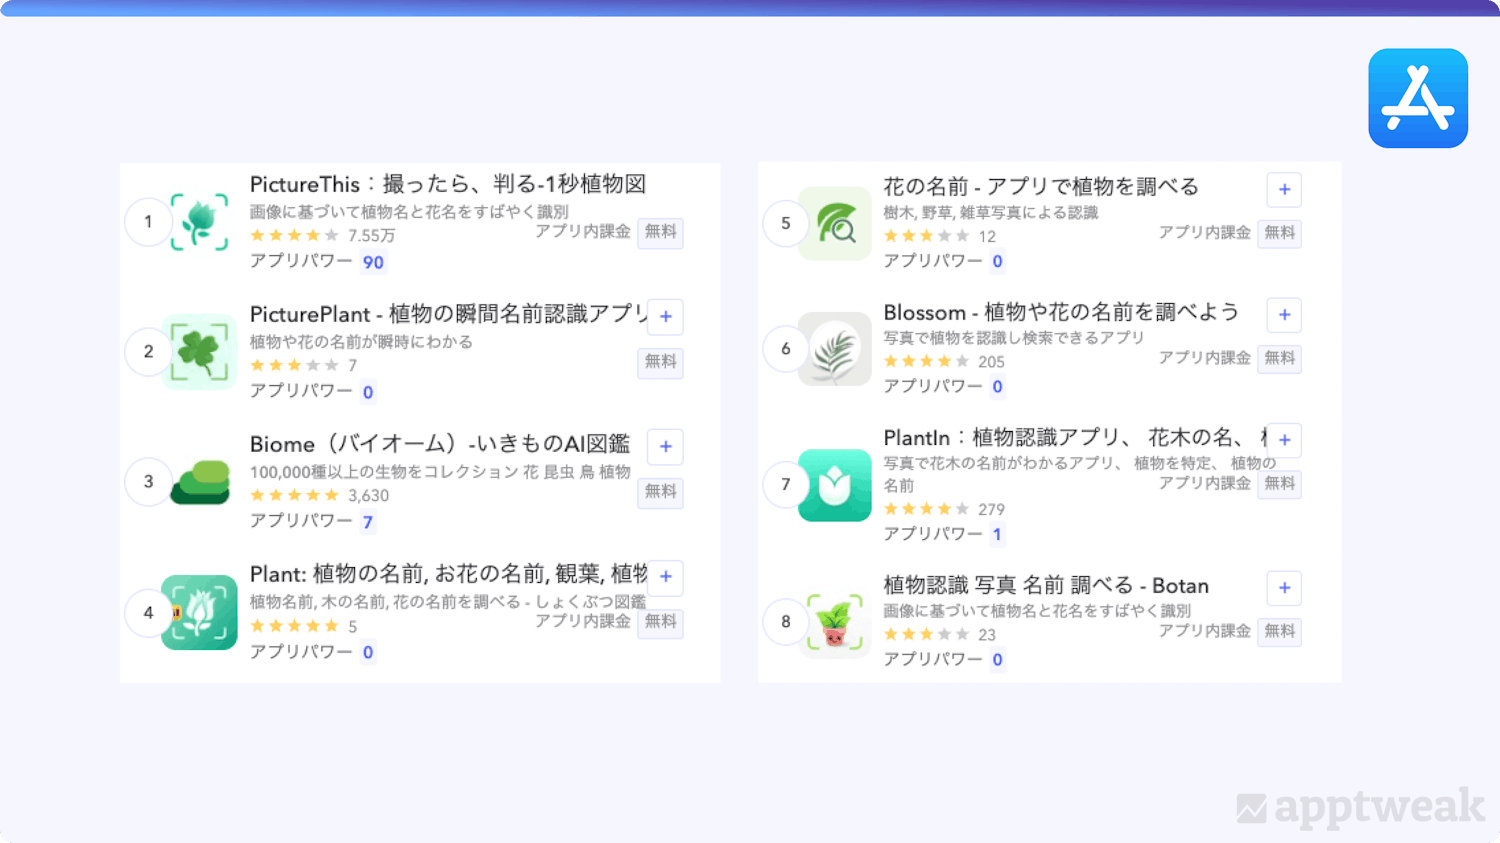 Live search results for plant identifier on the Japan App Store